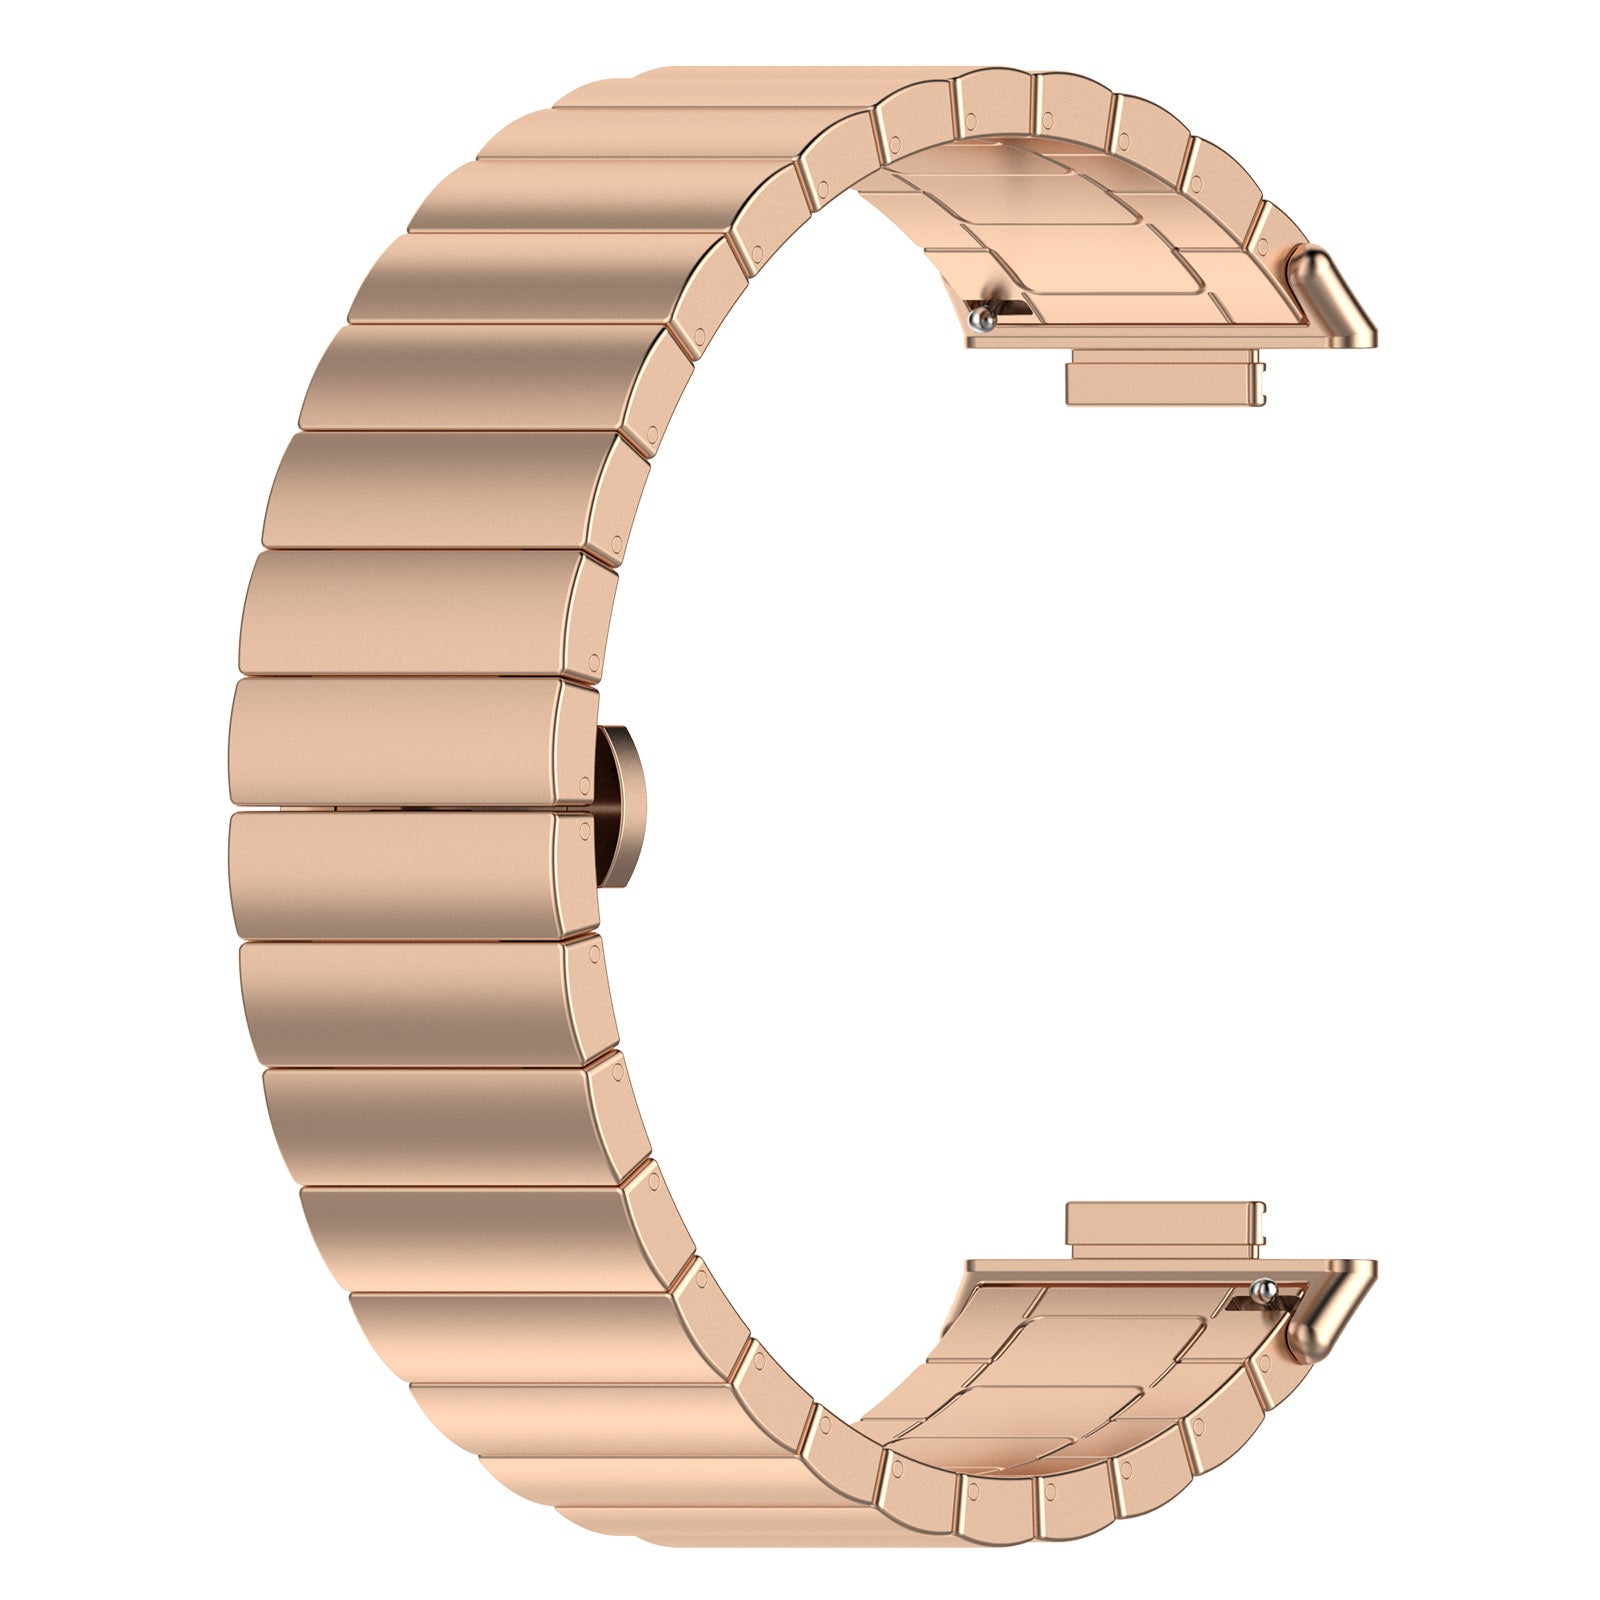 For Huawei Watch Fit 2 Smart Watch Band Buckle Design Metal Wrist Strap Replacement - Rose Gold